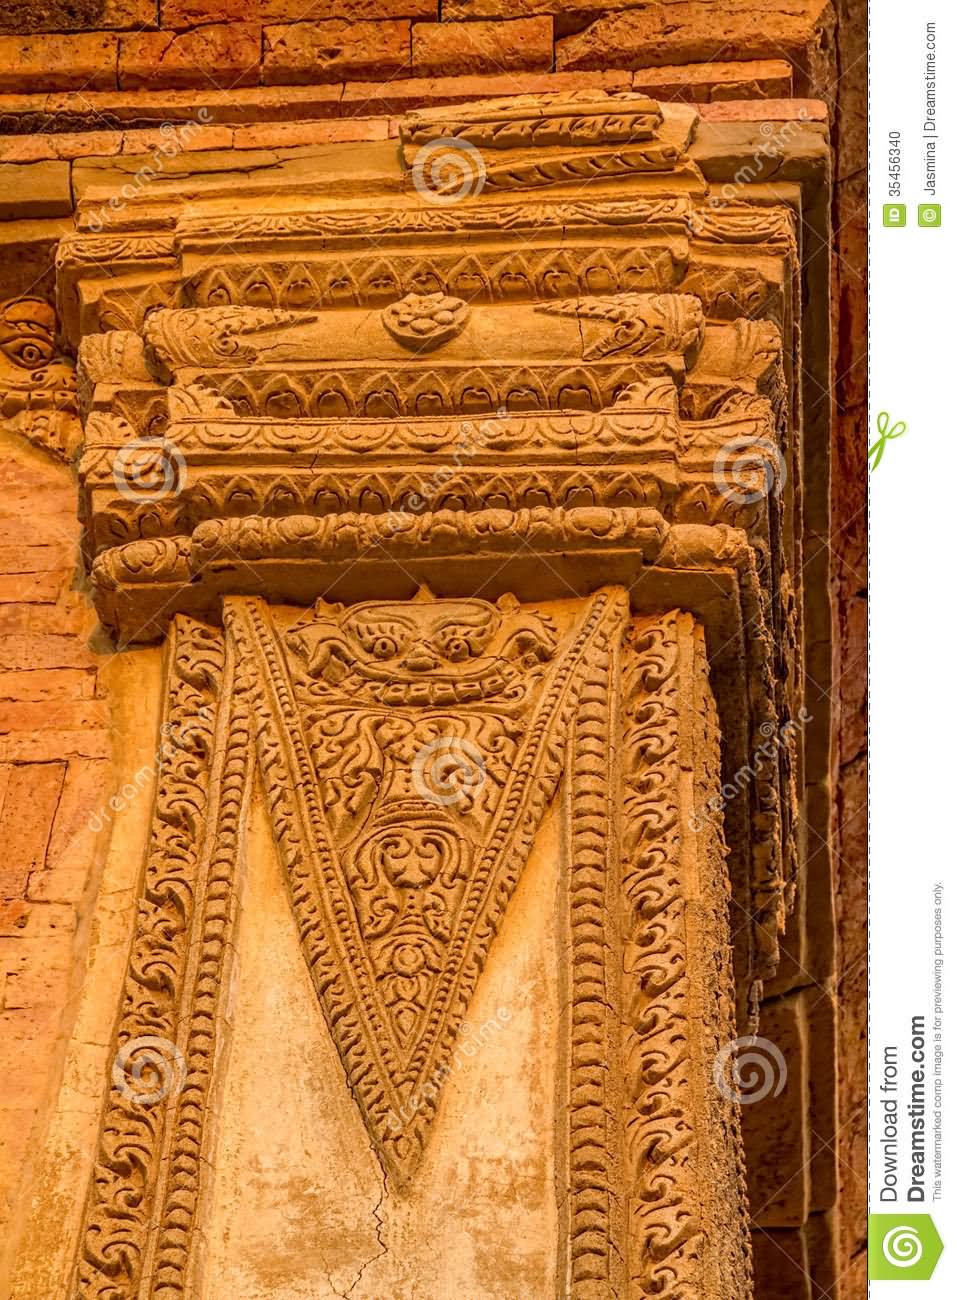 Reign King Kyanzittha Architecture Works On The Walls Of The Sulamani Temple